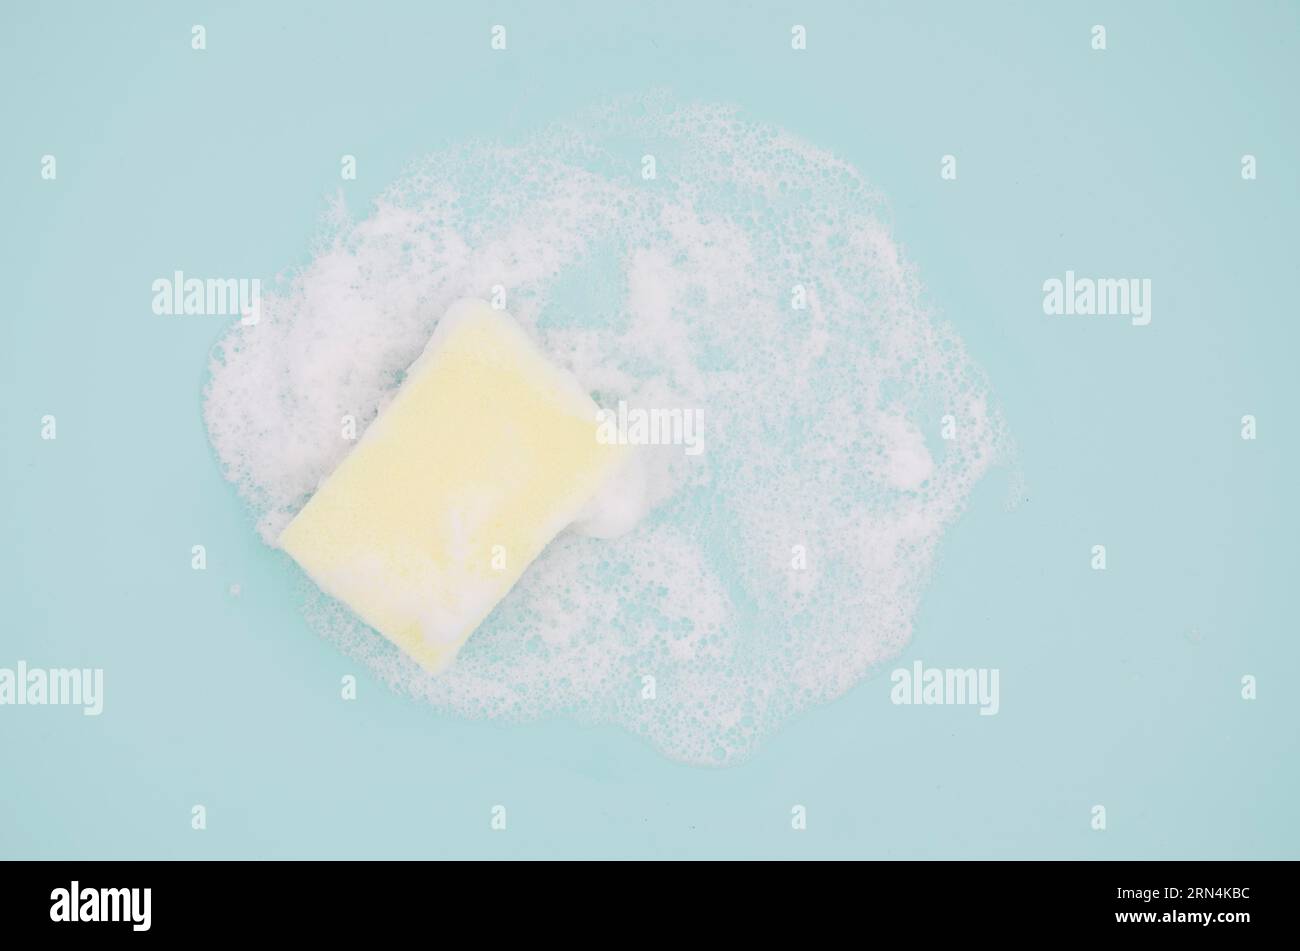 Overhead view sponge with sud blue background Stock Photo